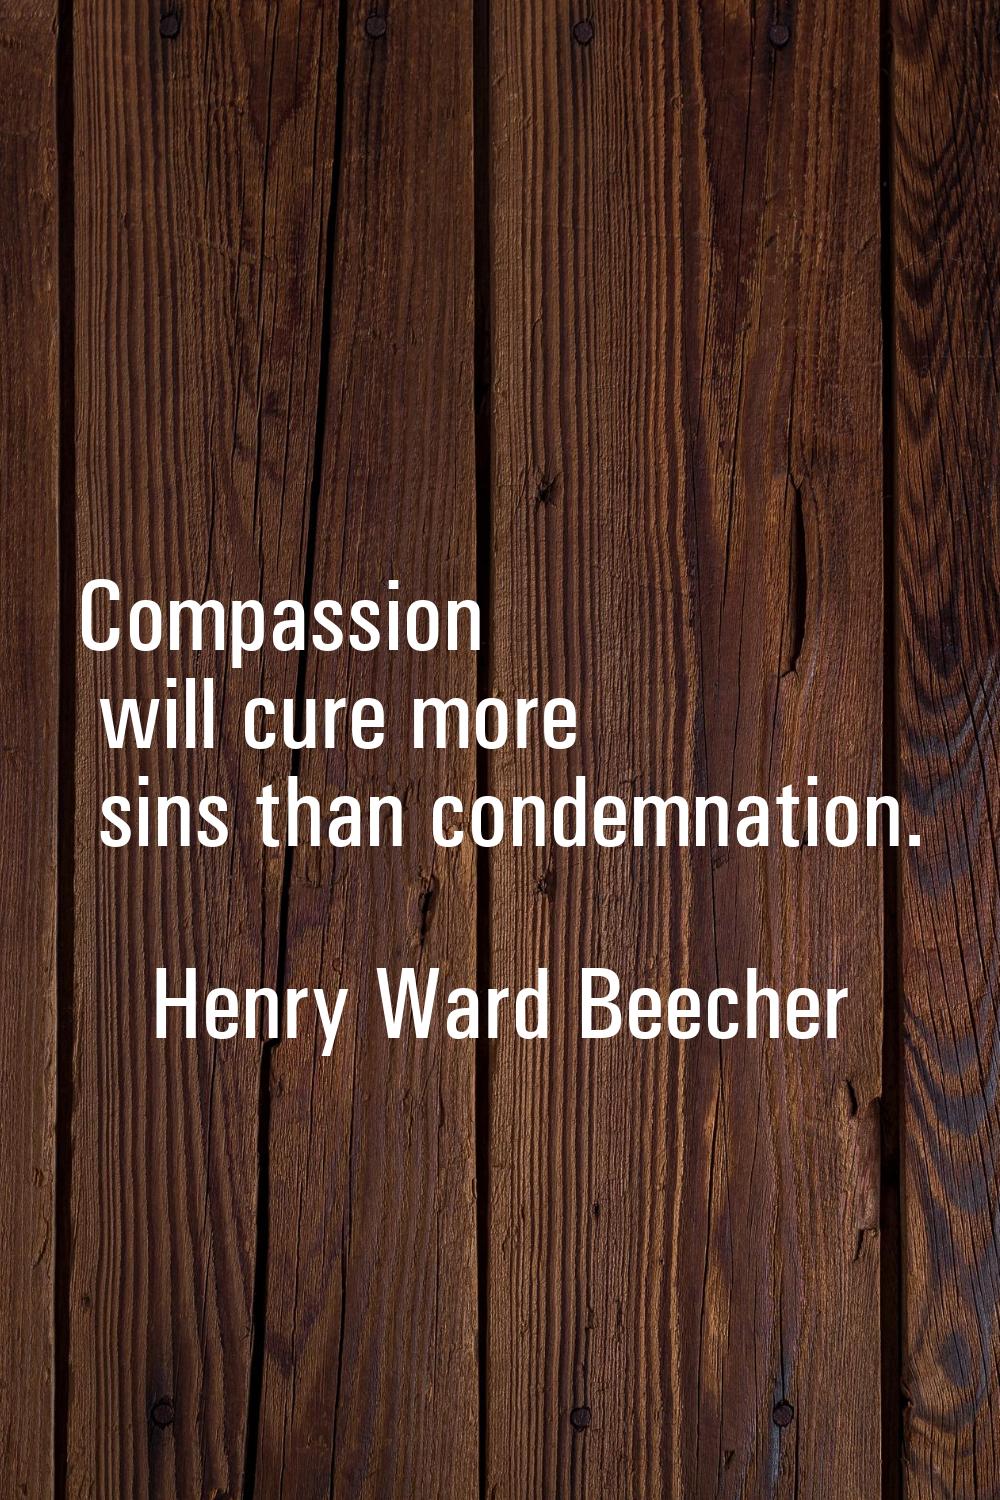 Compassion will cure more sins than condemnation.